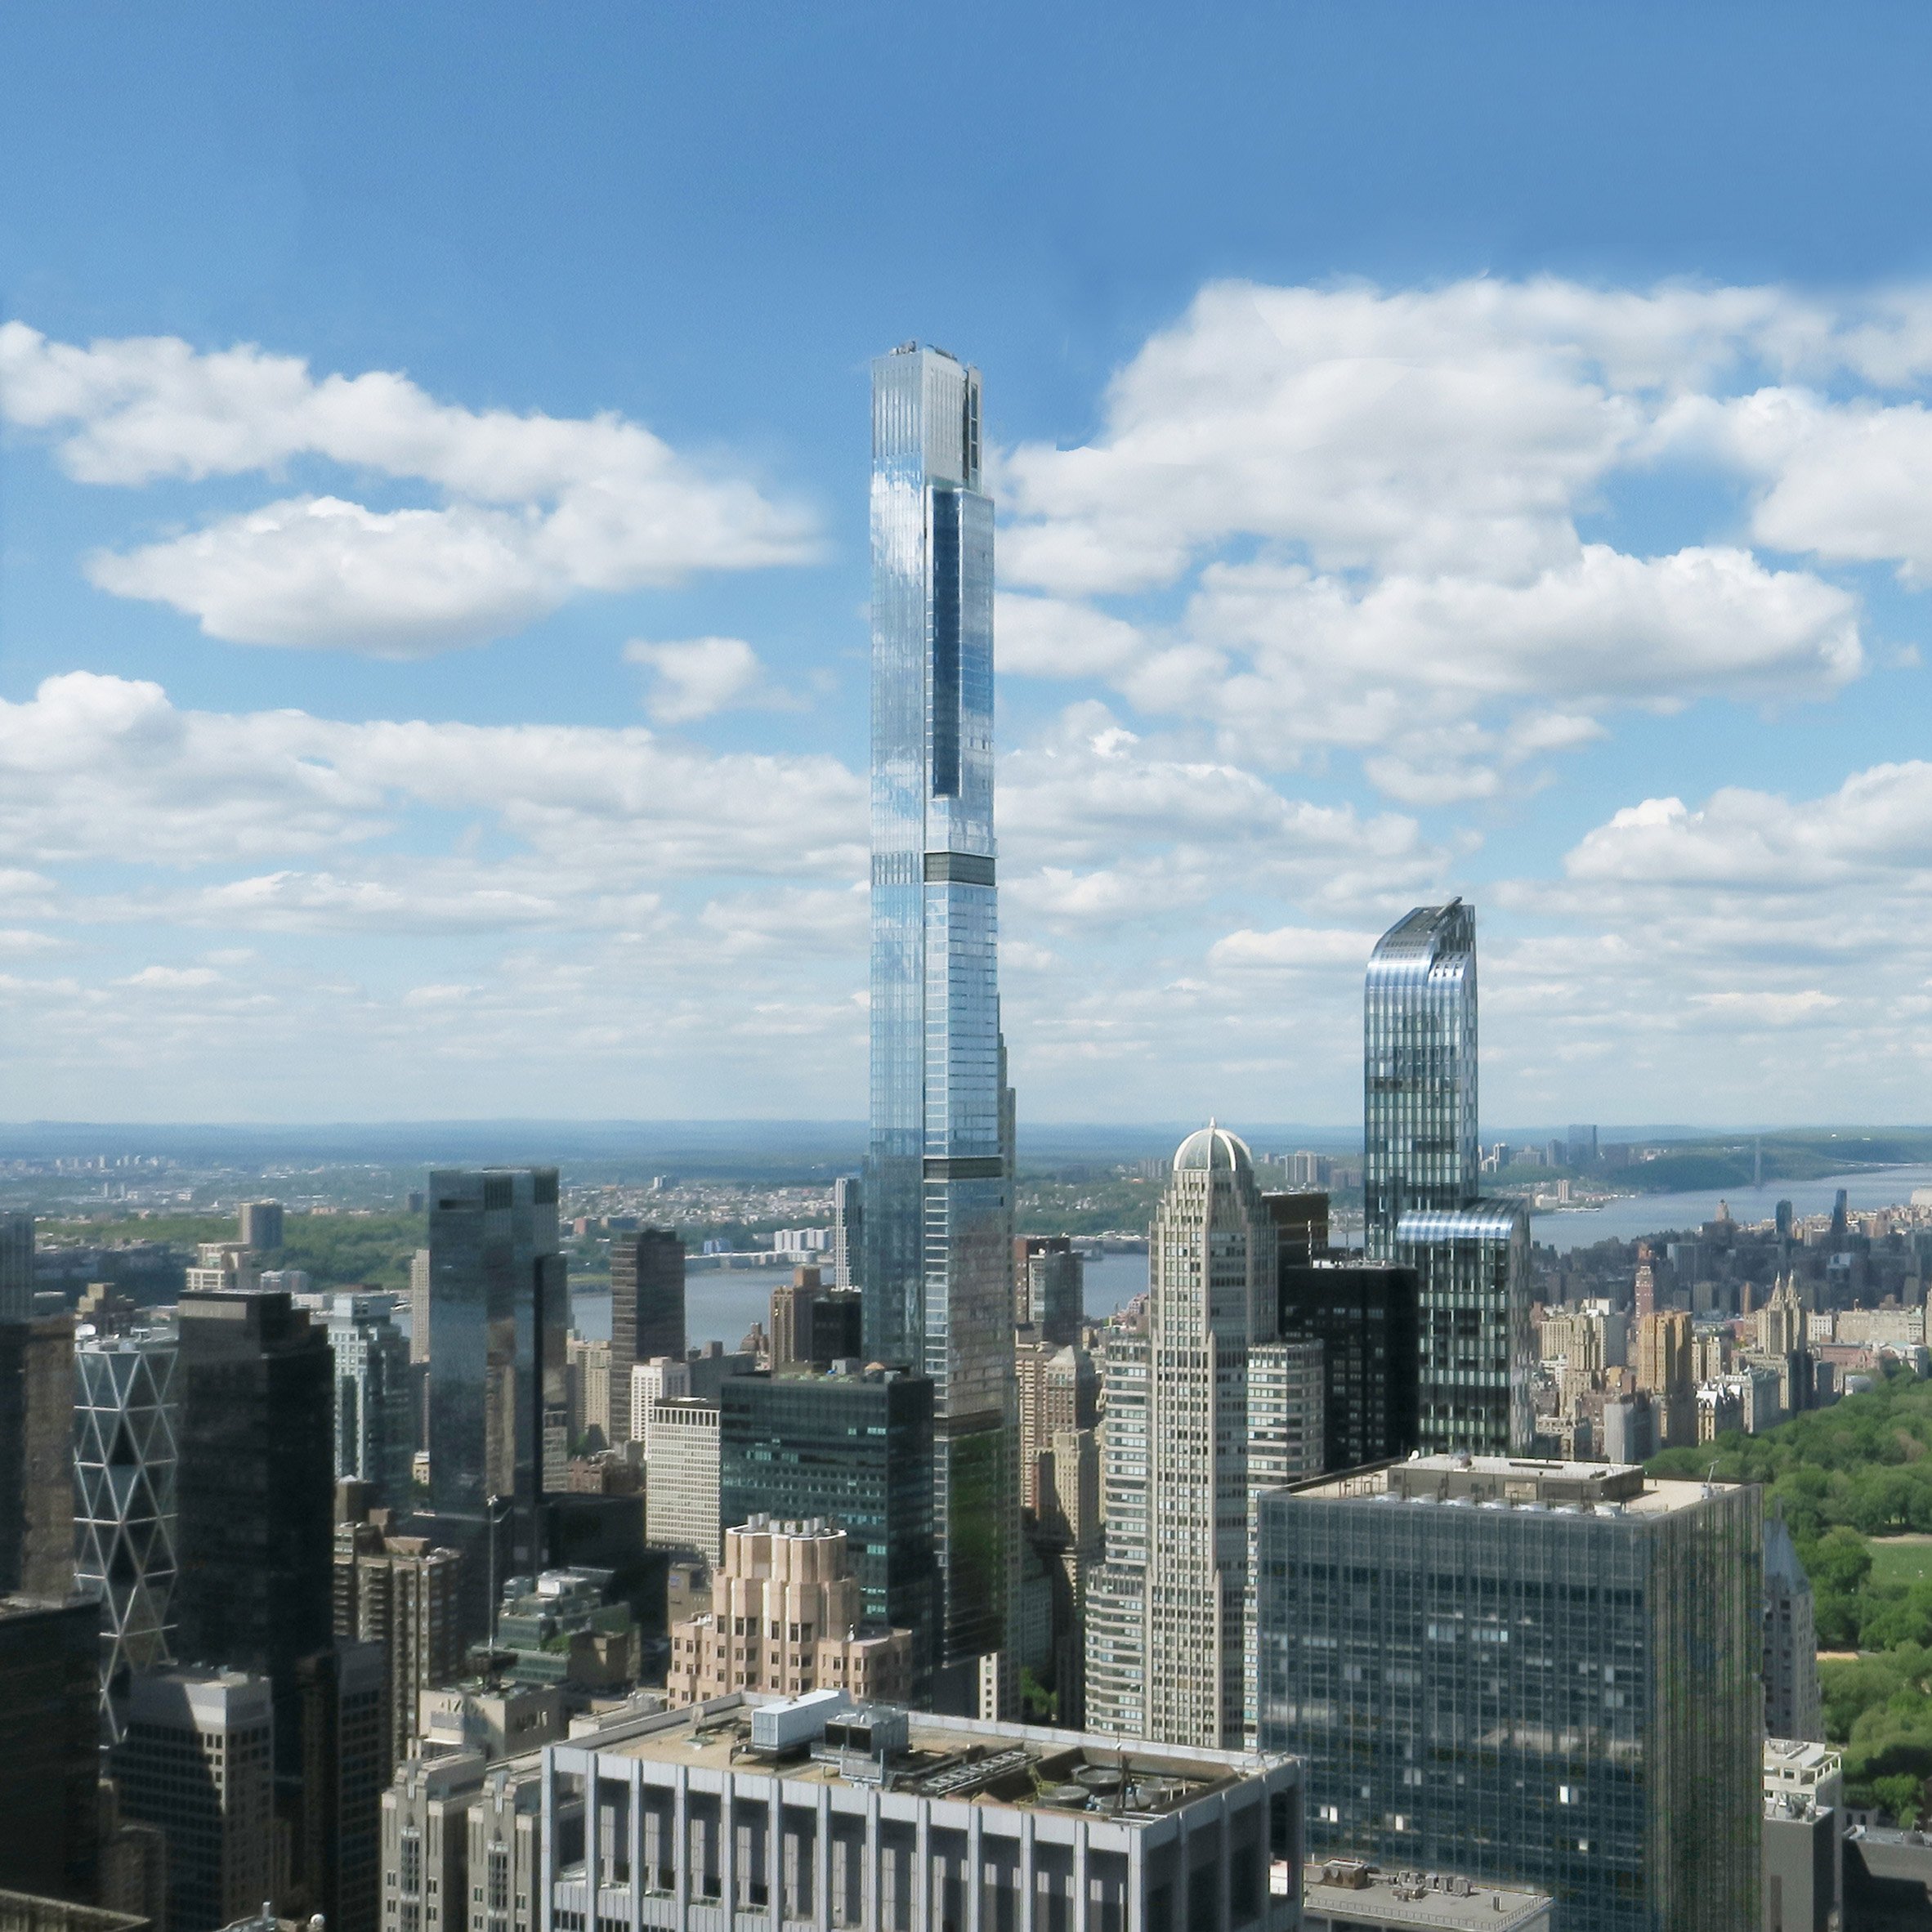 Photos Show Supertall Skyscraper Central Park Tower Nearing Completion